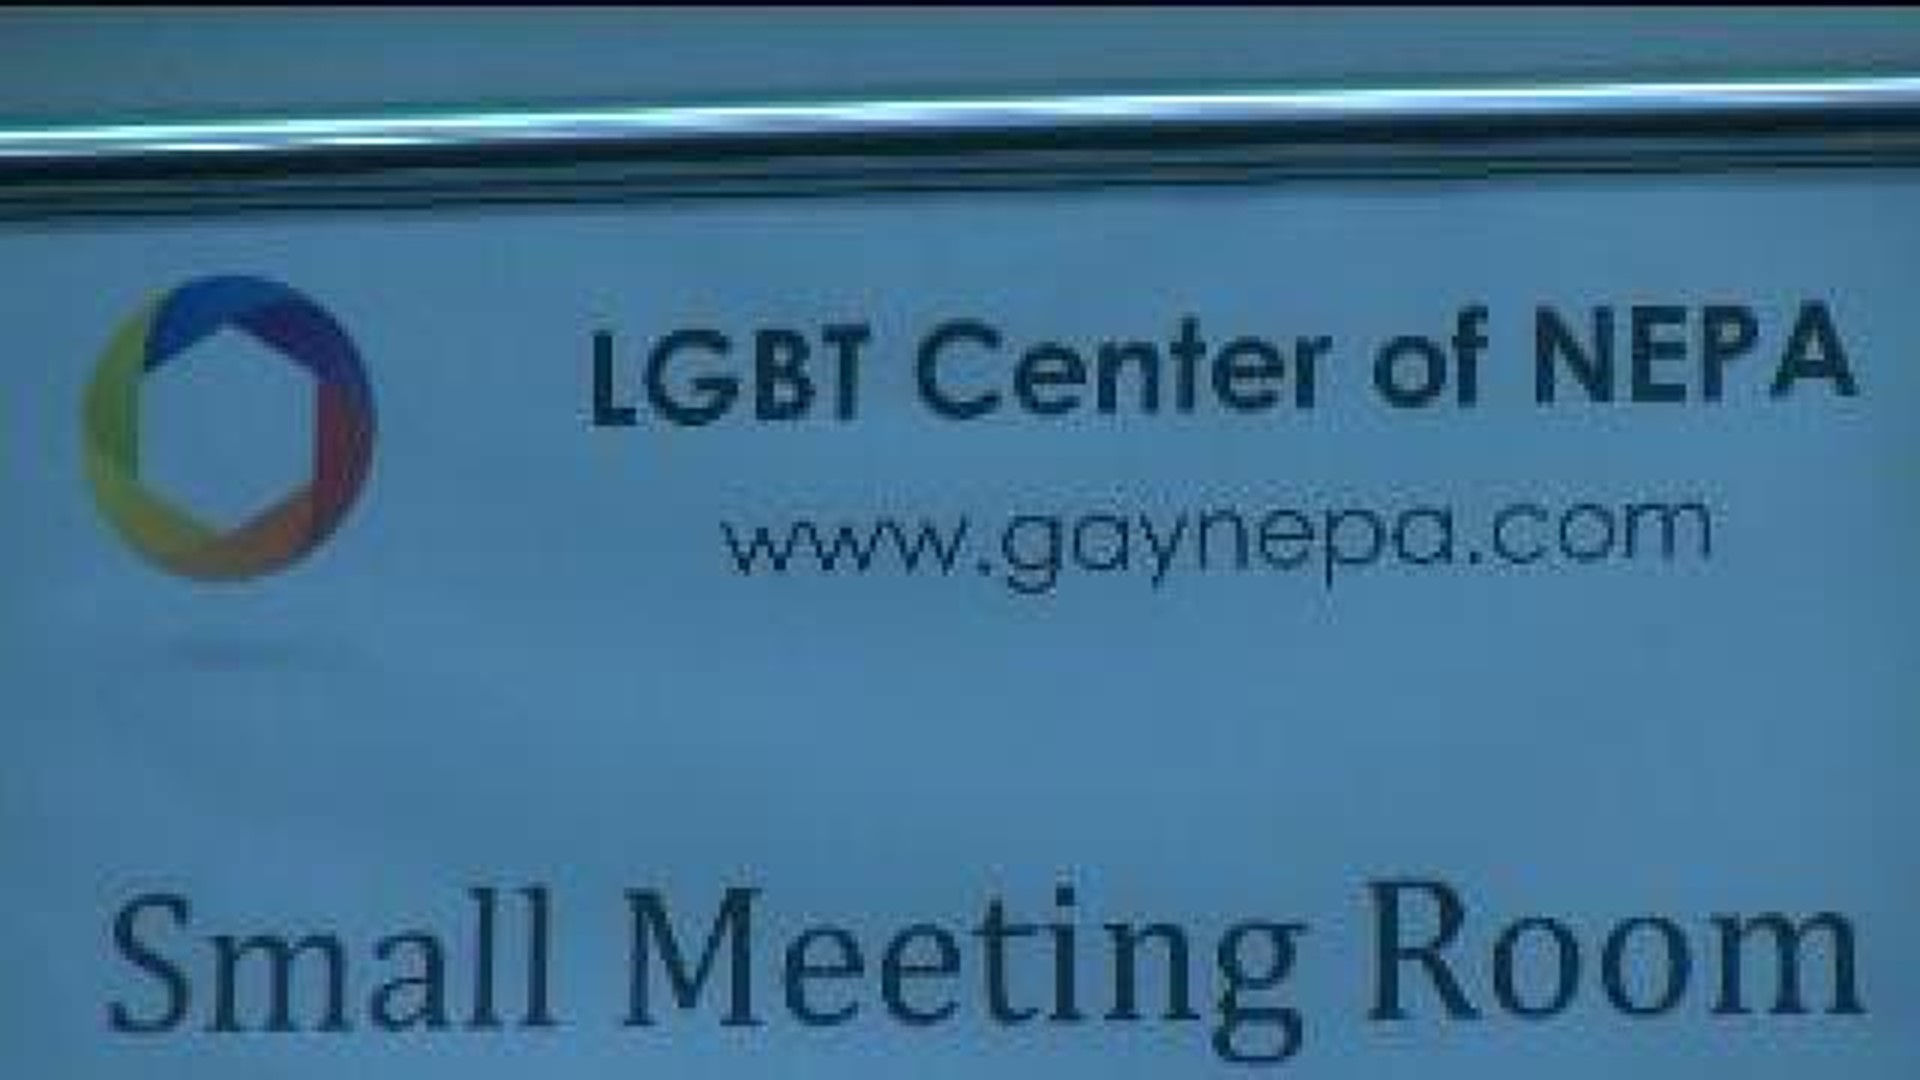 Judge Overturns PA's Same-Sex Marriage Ban